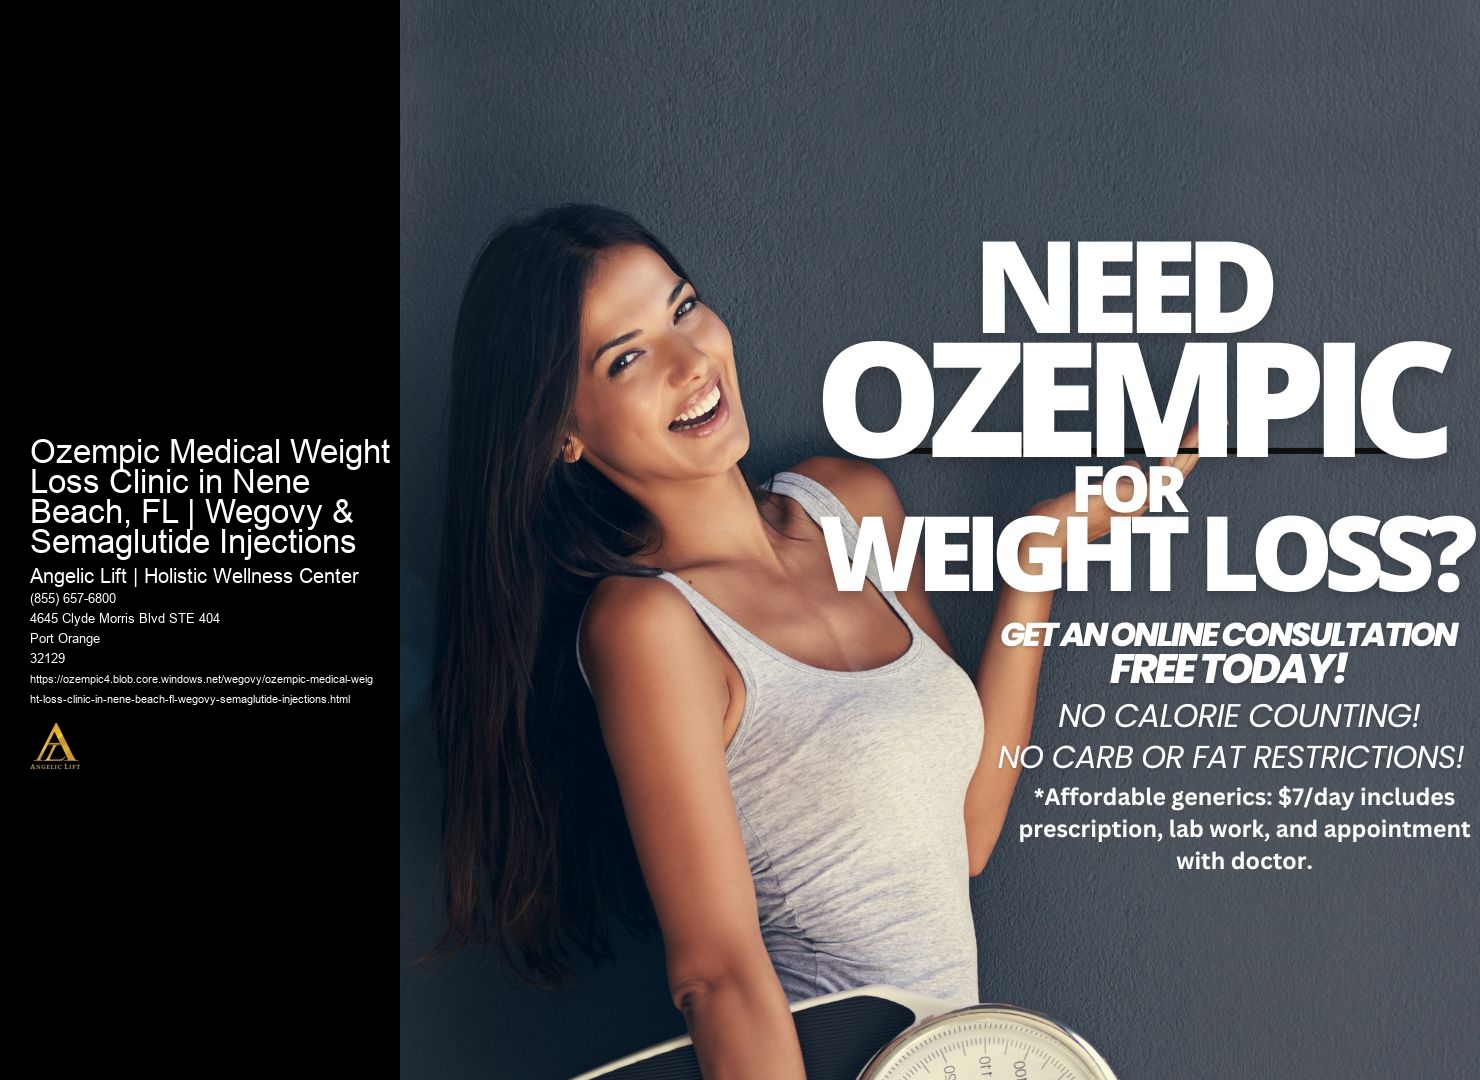 Ozempic Medical Weight Loss Clinic in Nene Beach, FL | Wegovy & Semaglutide Injections